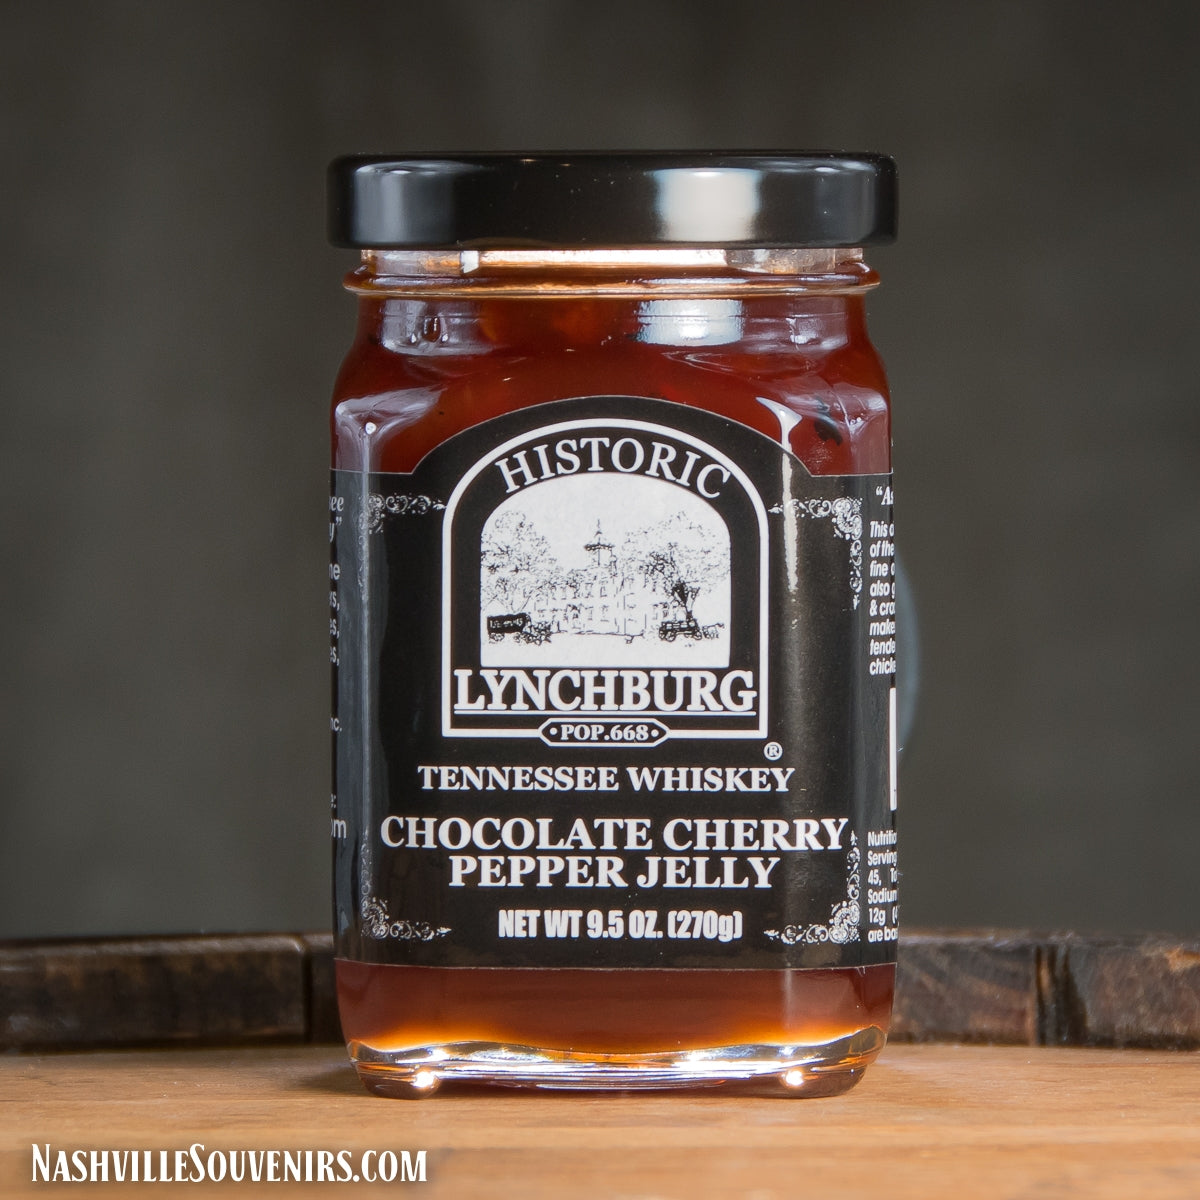 This historic Lynchburg Chocolate Cherry Pepper Jelly wakes up all your morning favorites - great on toast, biscuits or bagels! FREE SHIPPING on all US orders over $75!